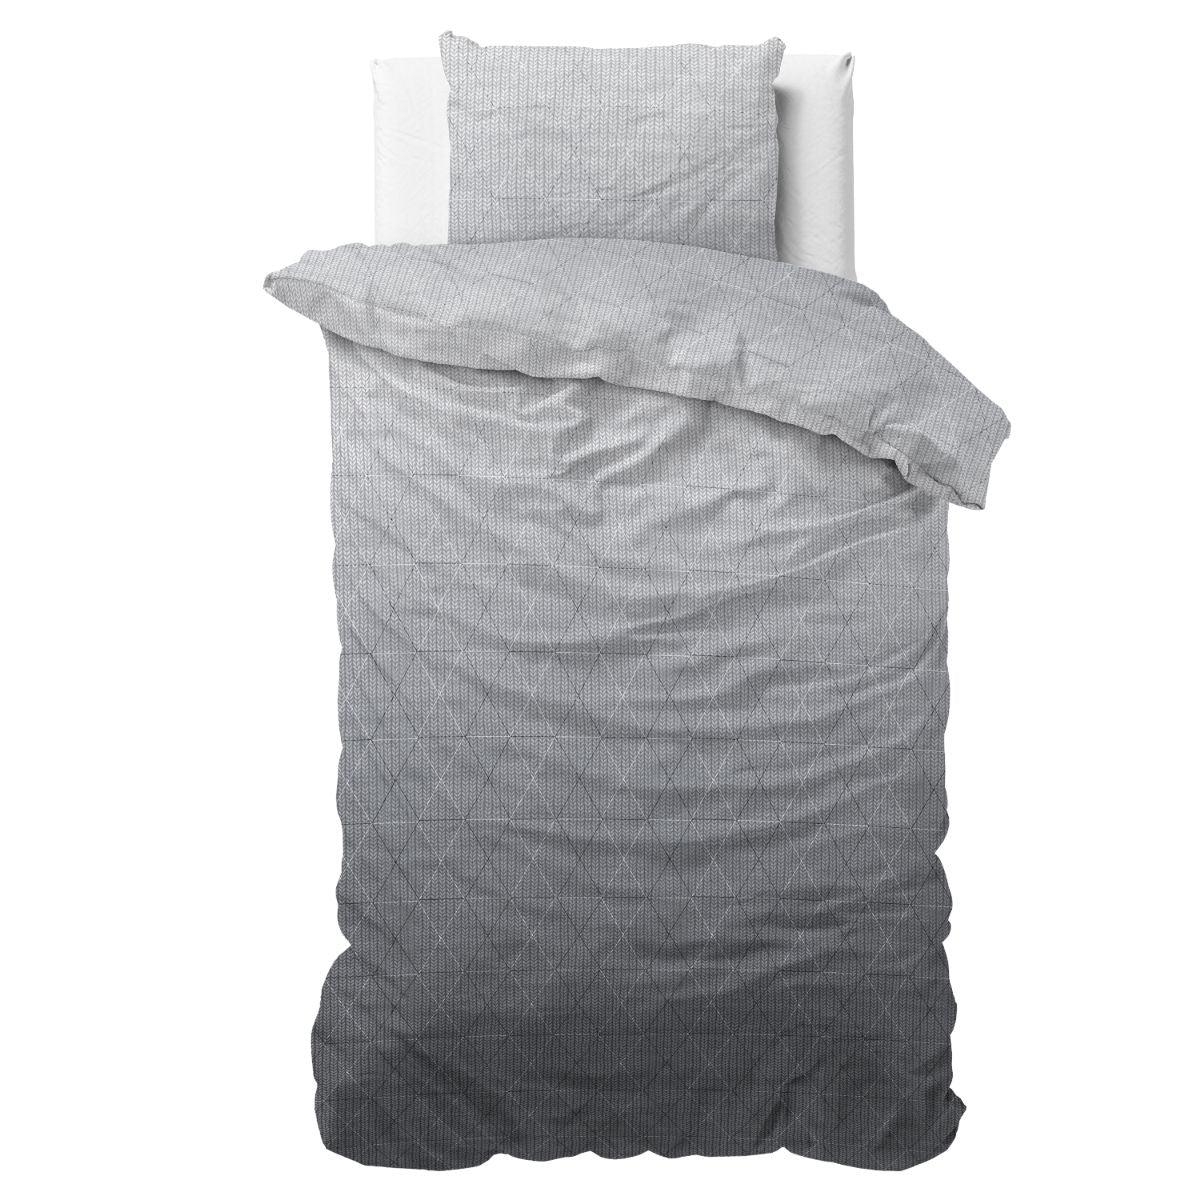 Duvet cover with pillowcases - Flannel Quinn Anthracite with pillowcases - Y-NOT |  be different